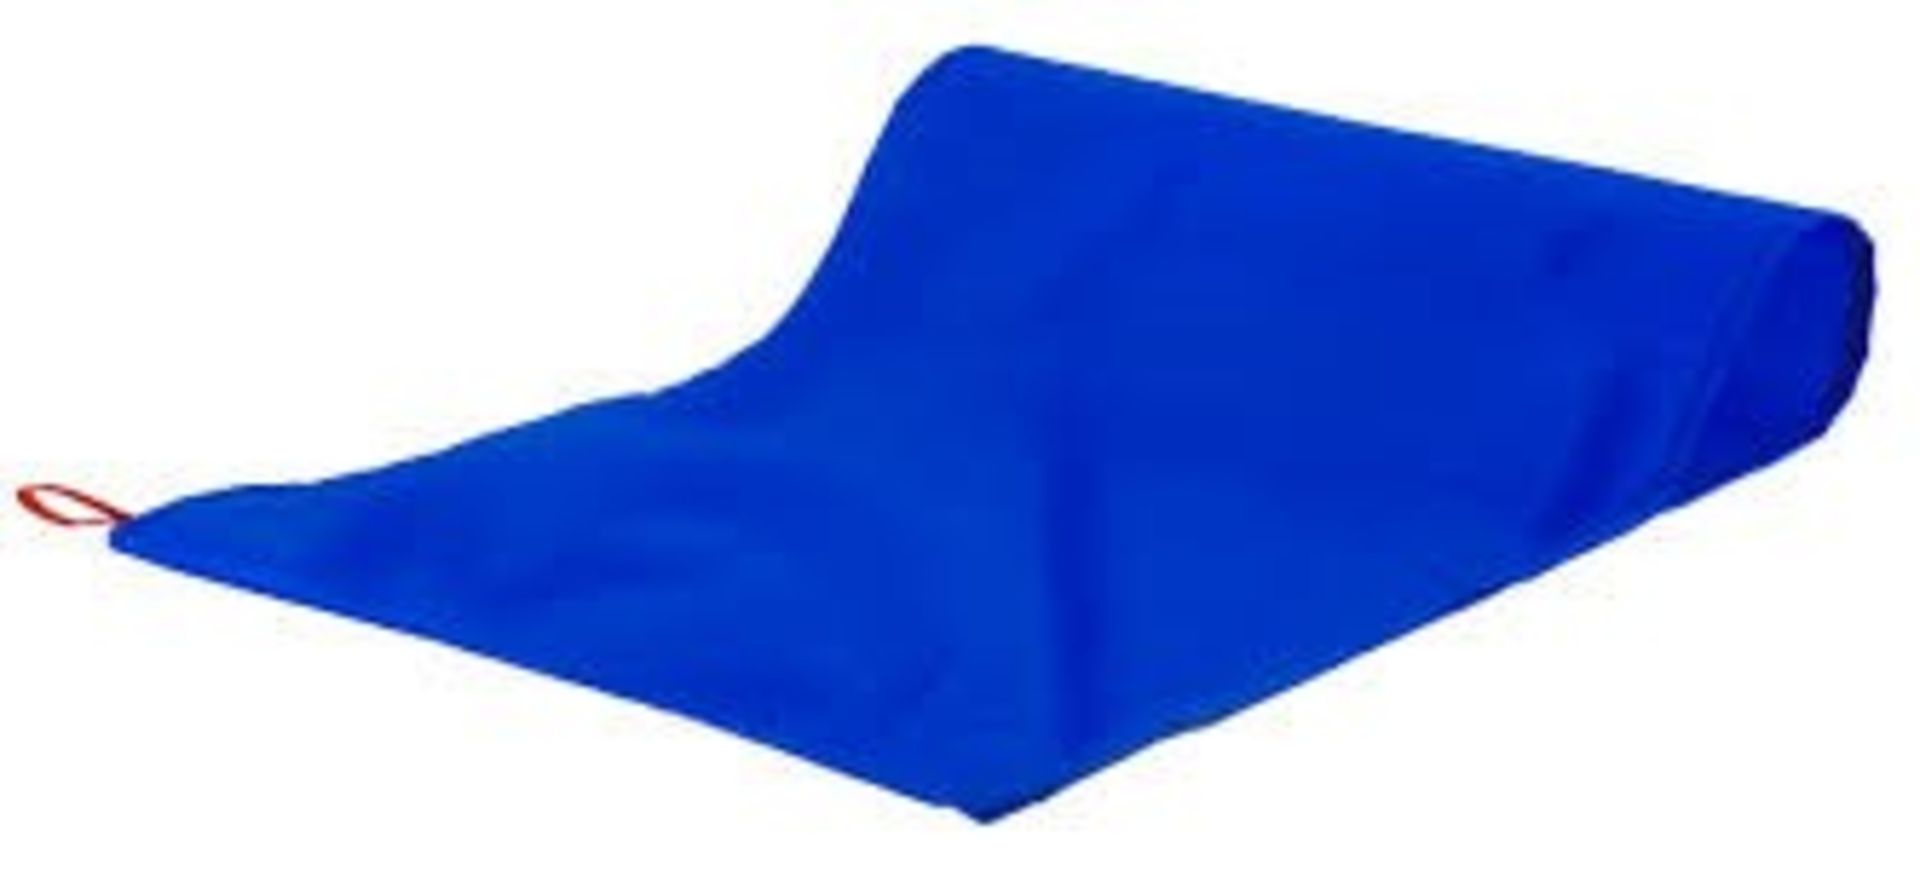 ME: 1 AS NEW BAGGED REUSABLE TUBULAR SLIDE SHEET IN BLUE / RP £33.00 (VIEWING HIGHLY RECOMMENDED)